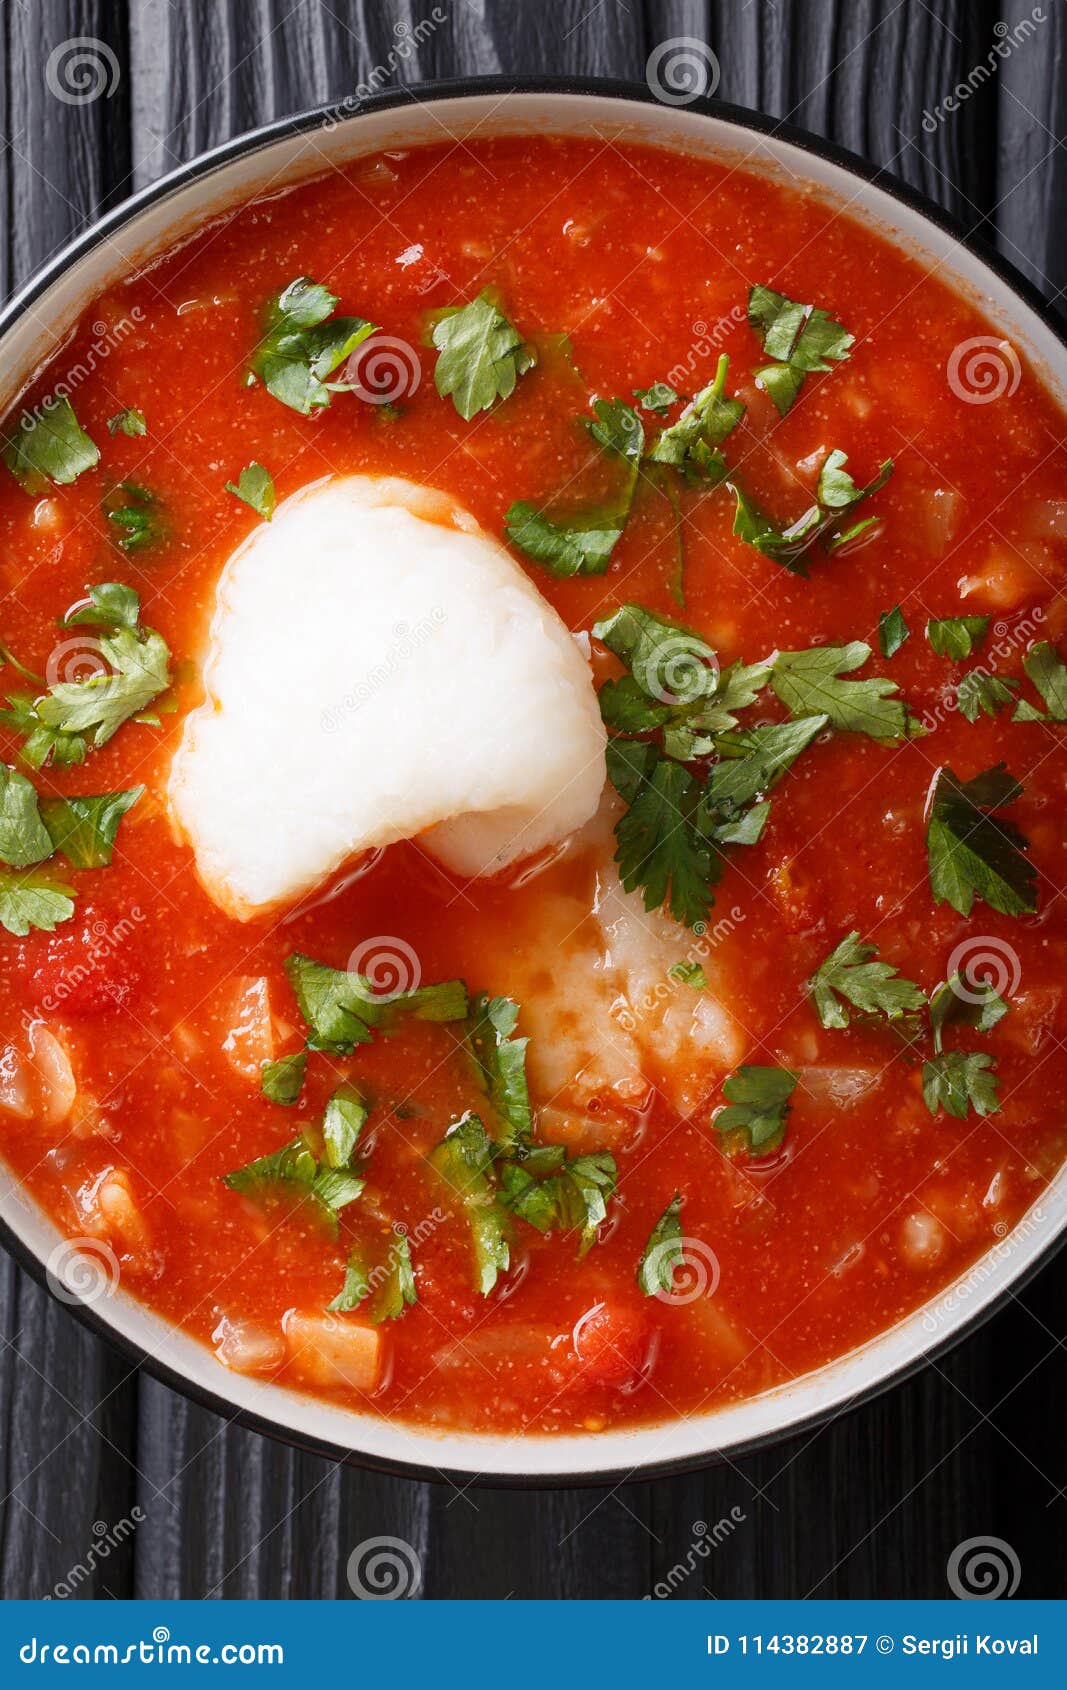 Cod Fish Tomato Soup with Celery and Parsley Close-up in a Bowl. Stock ...